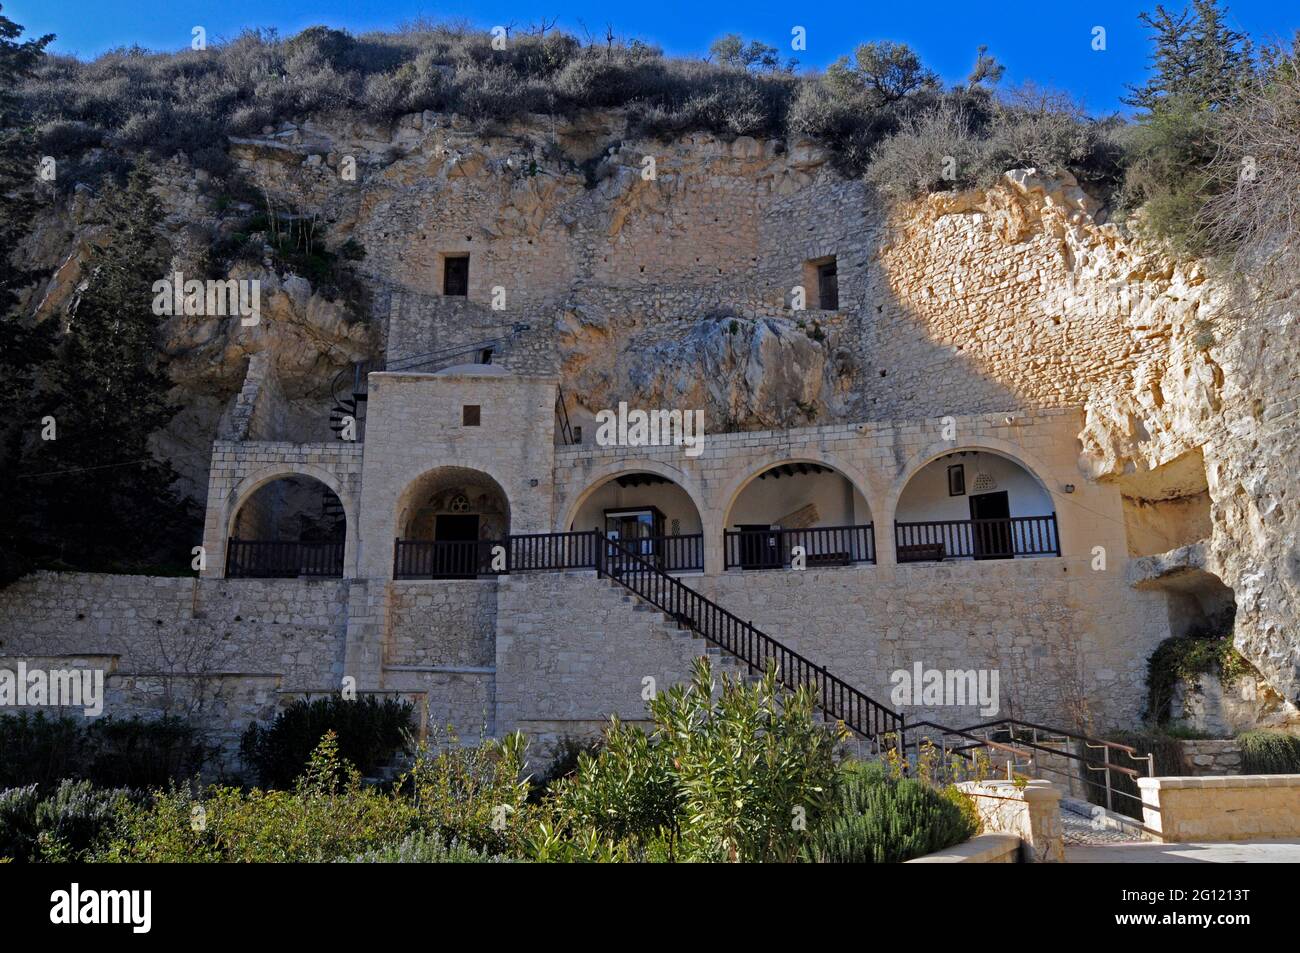 Building and caves where the hermit monk Neofytos lived for many years at the Monastery of Agios Neofytos in Pafos Cyprus Stock Photo